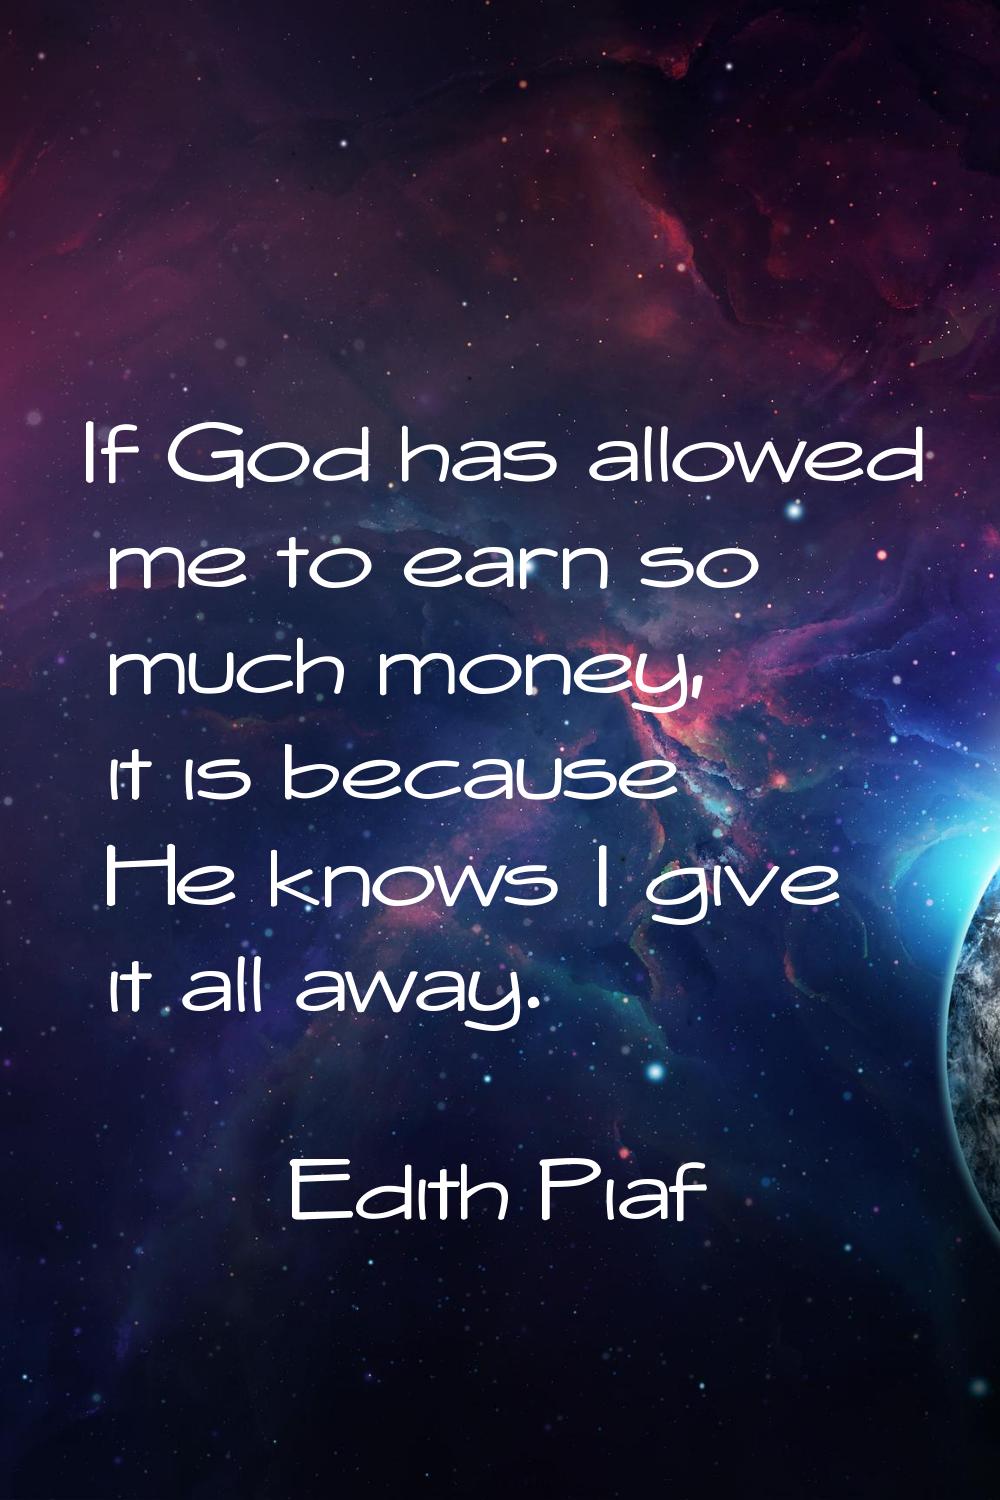 If God has allowed me to earn so much money, it is because He knows I give it all away.